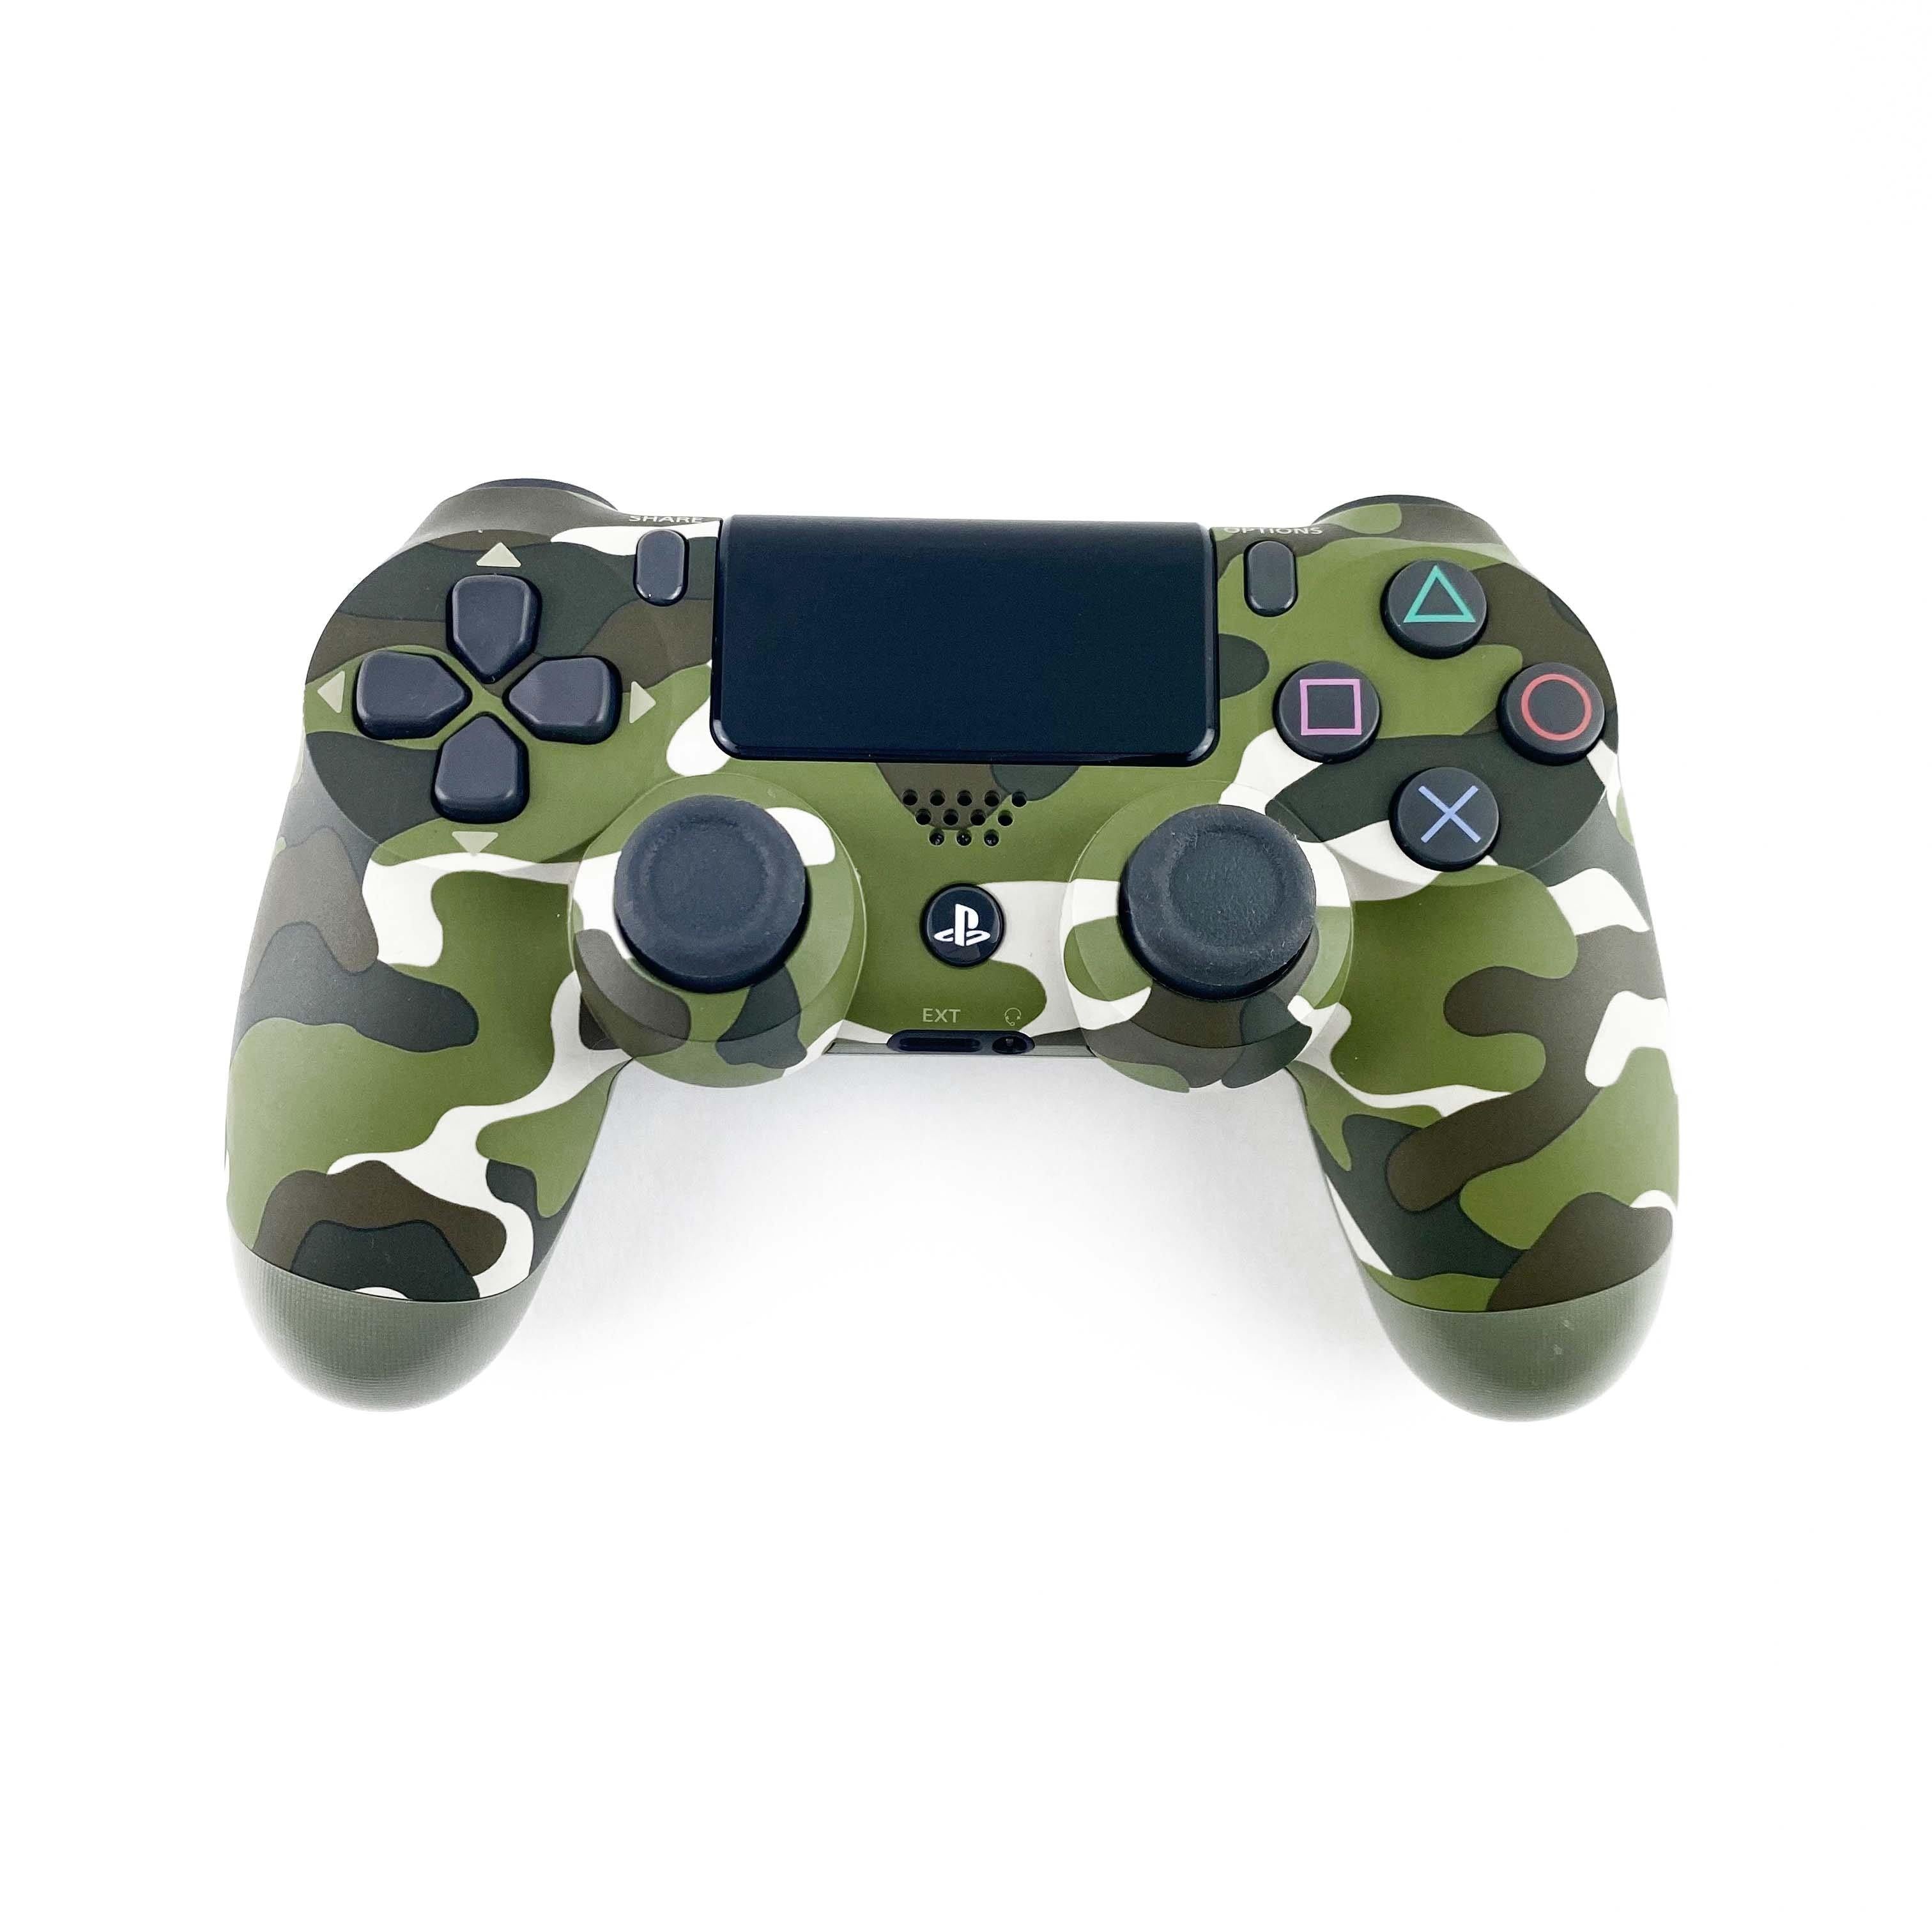 Sony PlayStation 4 PS4 Green Camo DualShock Wireless Controller